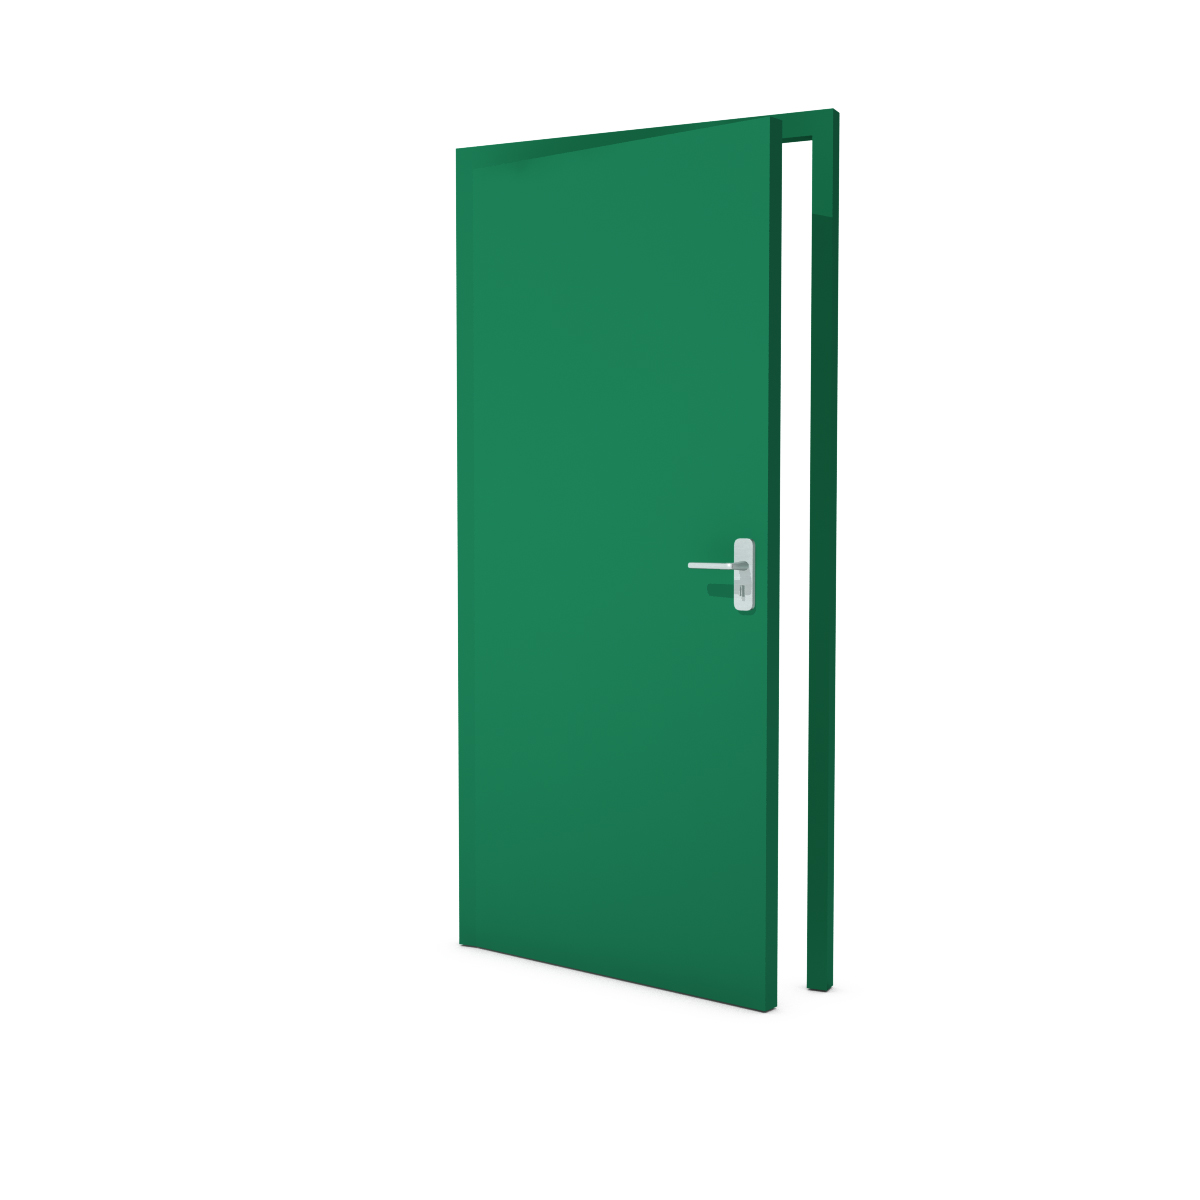 Single door covered in solid-color textile - Mint green